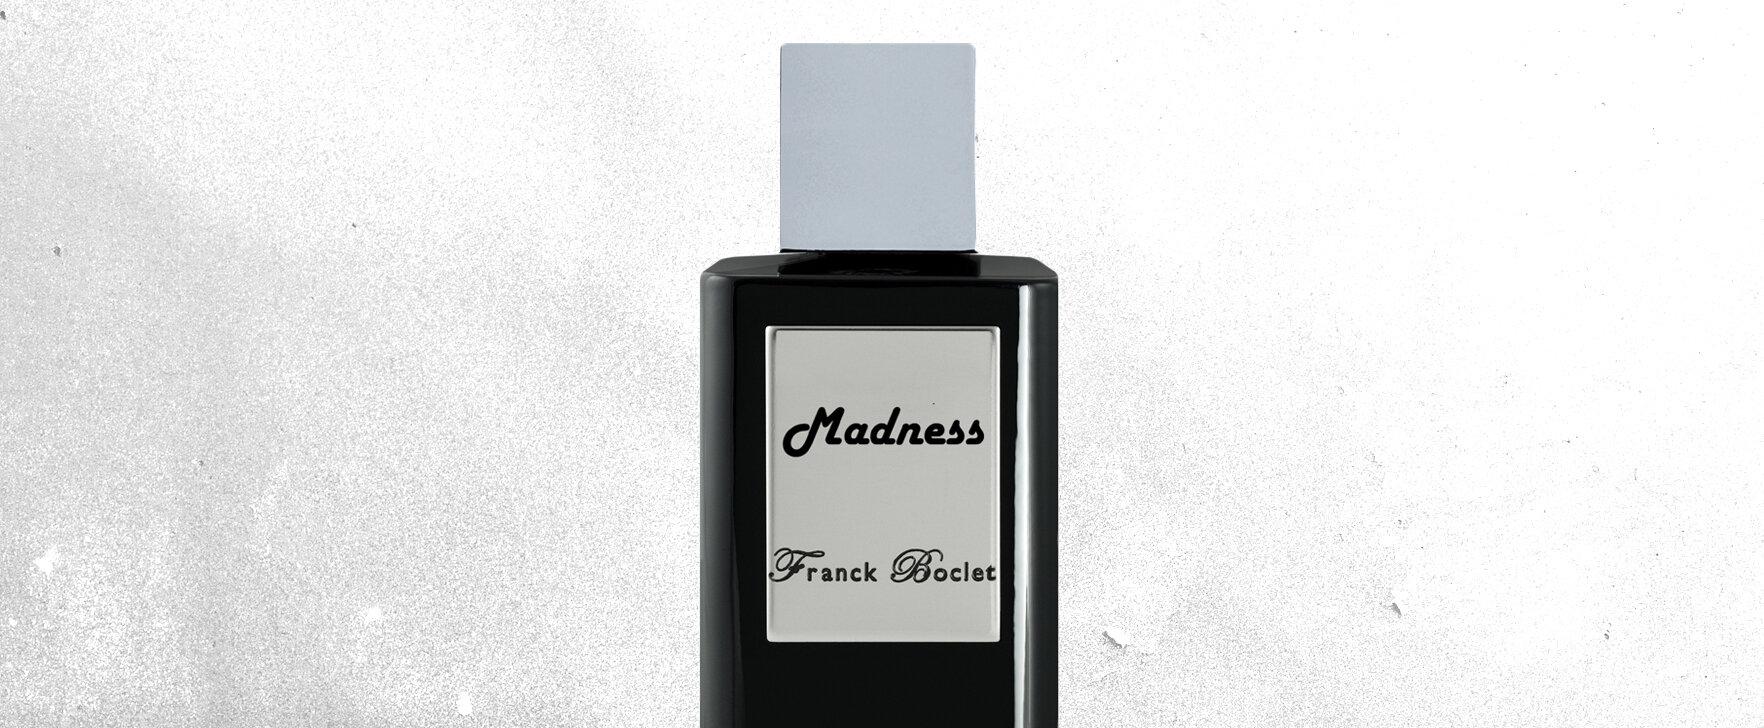 An Ode to the British Ska Band: The New Madness Extrait de Parfum by Franck Boclet